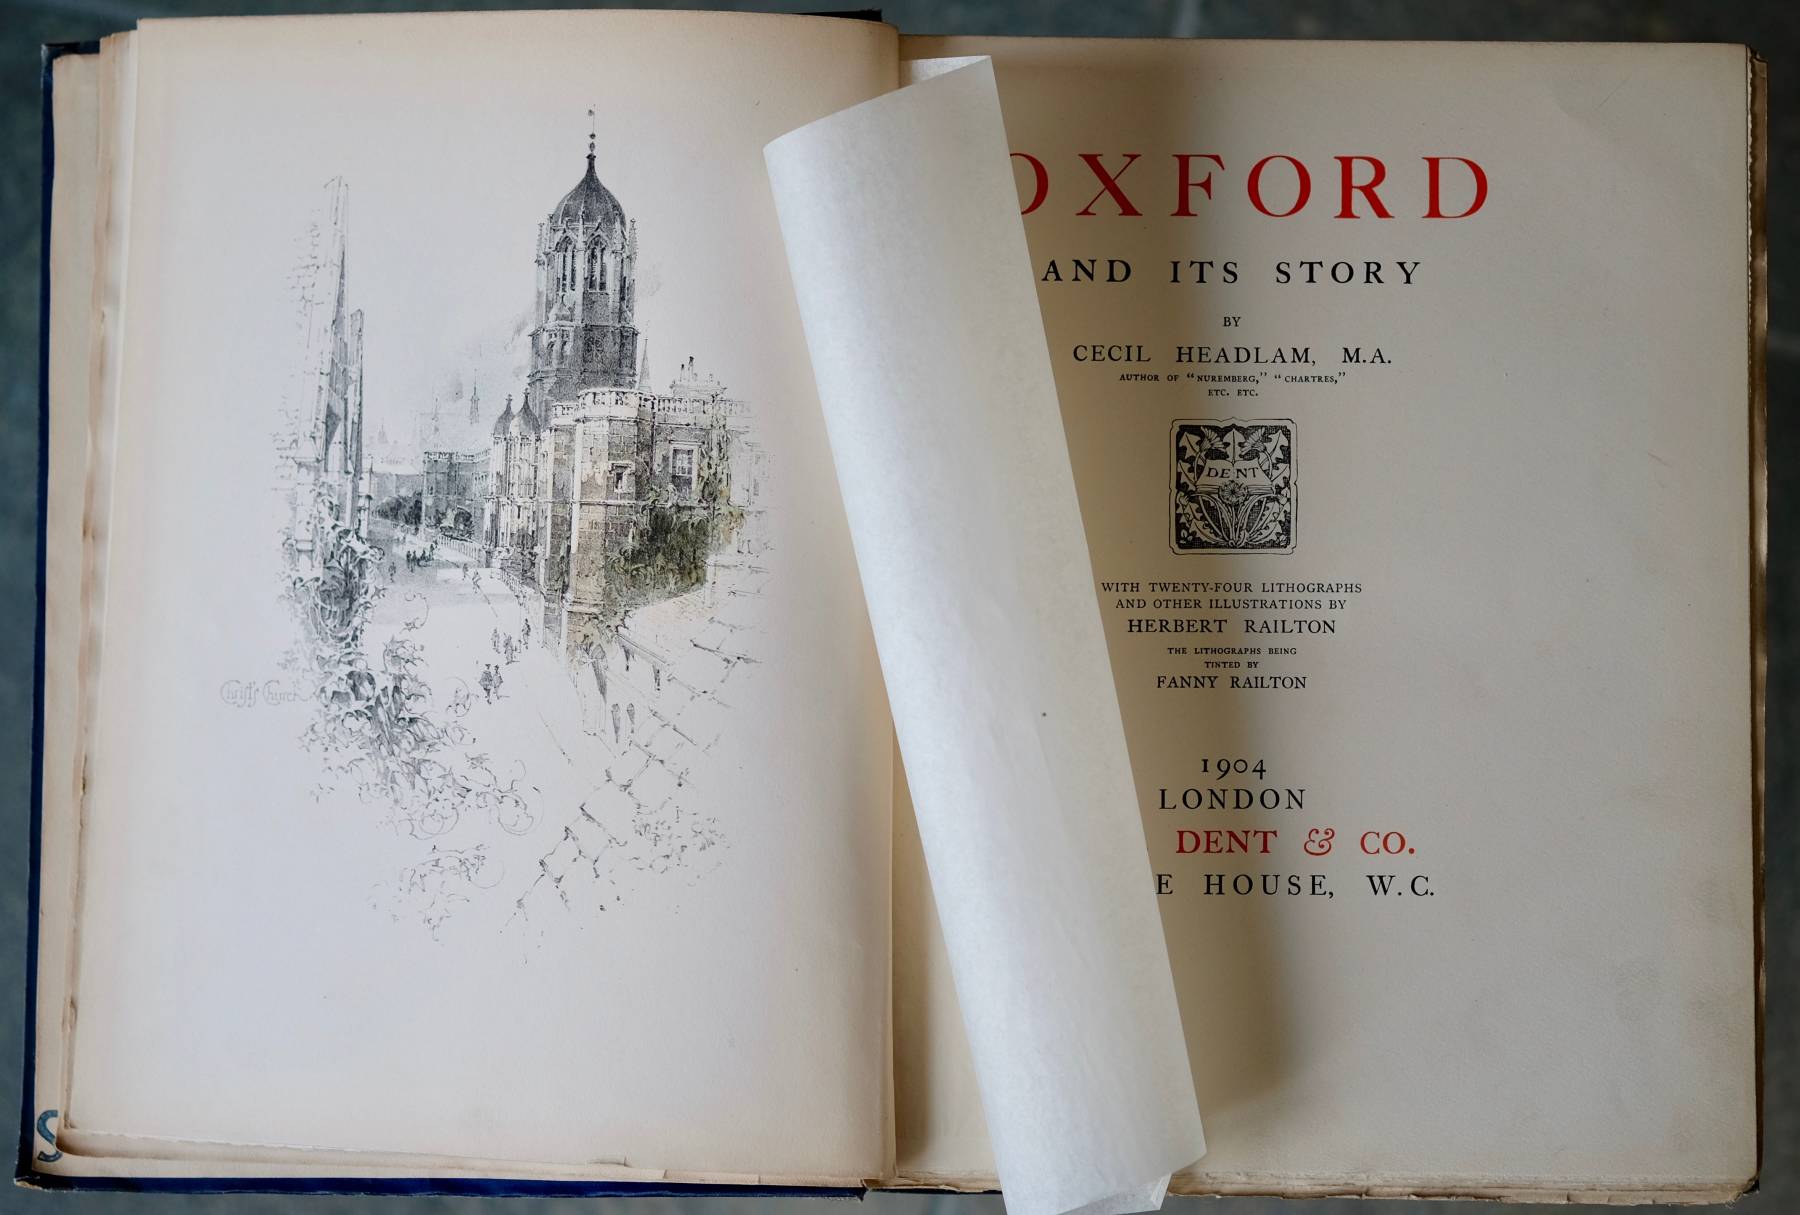 Oxford and its Story by Cecil Headlam